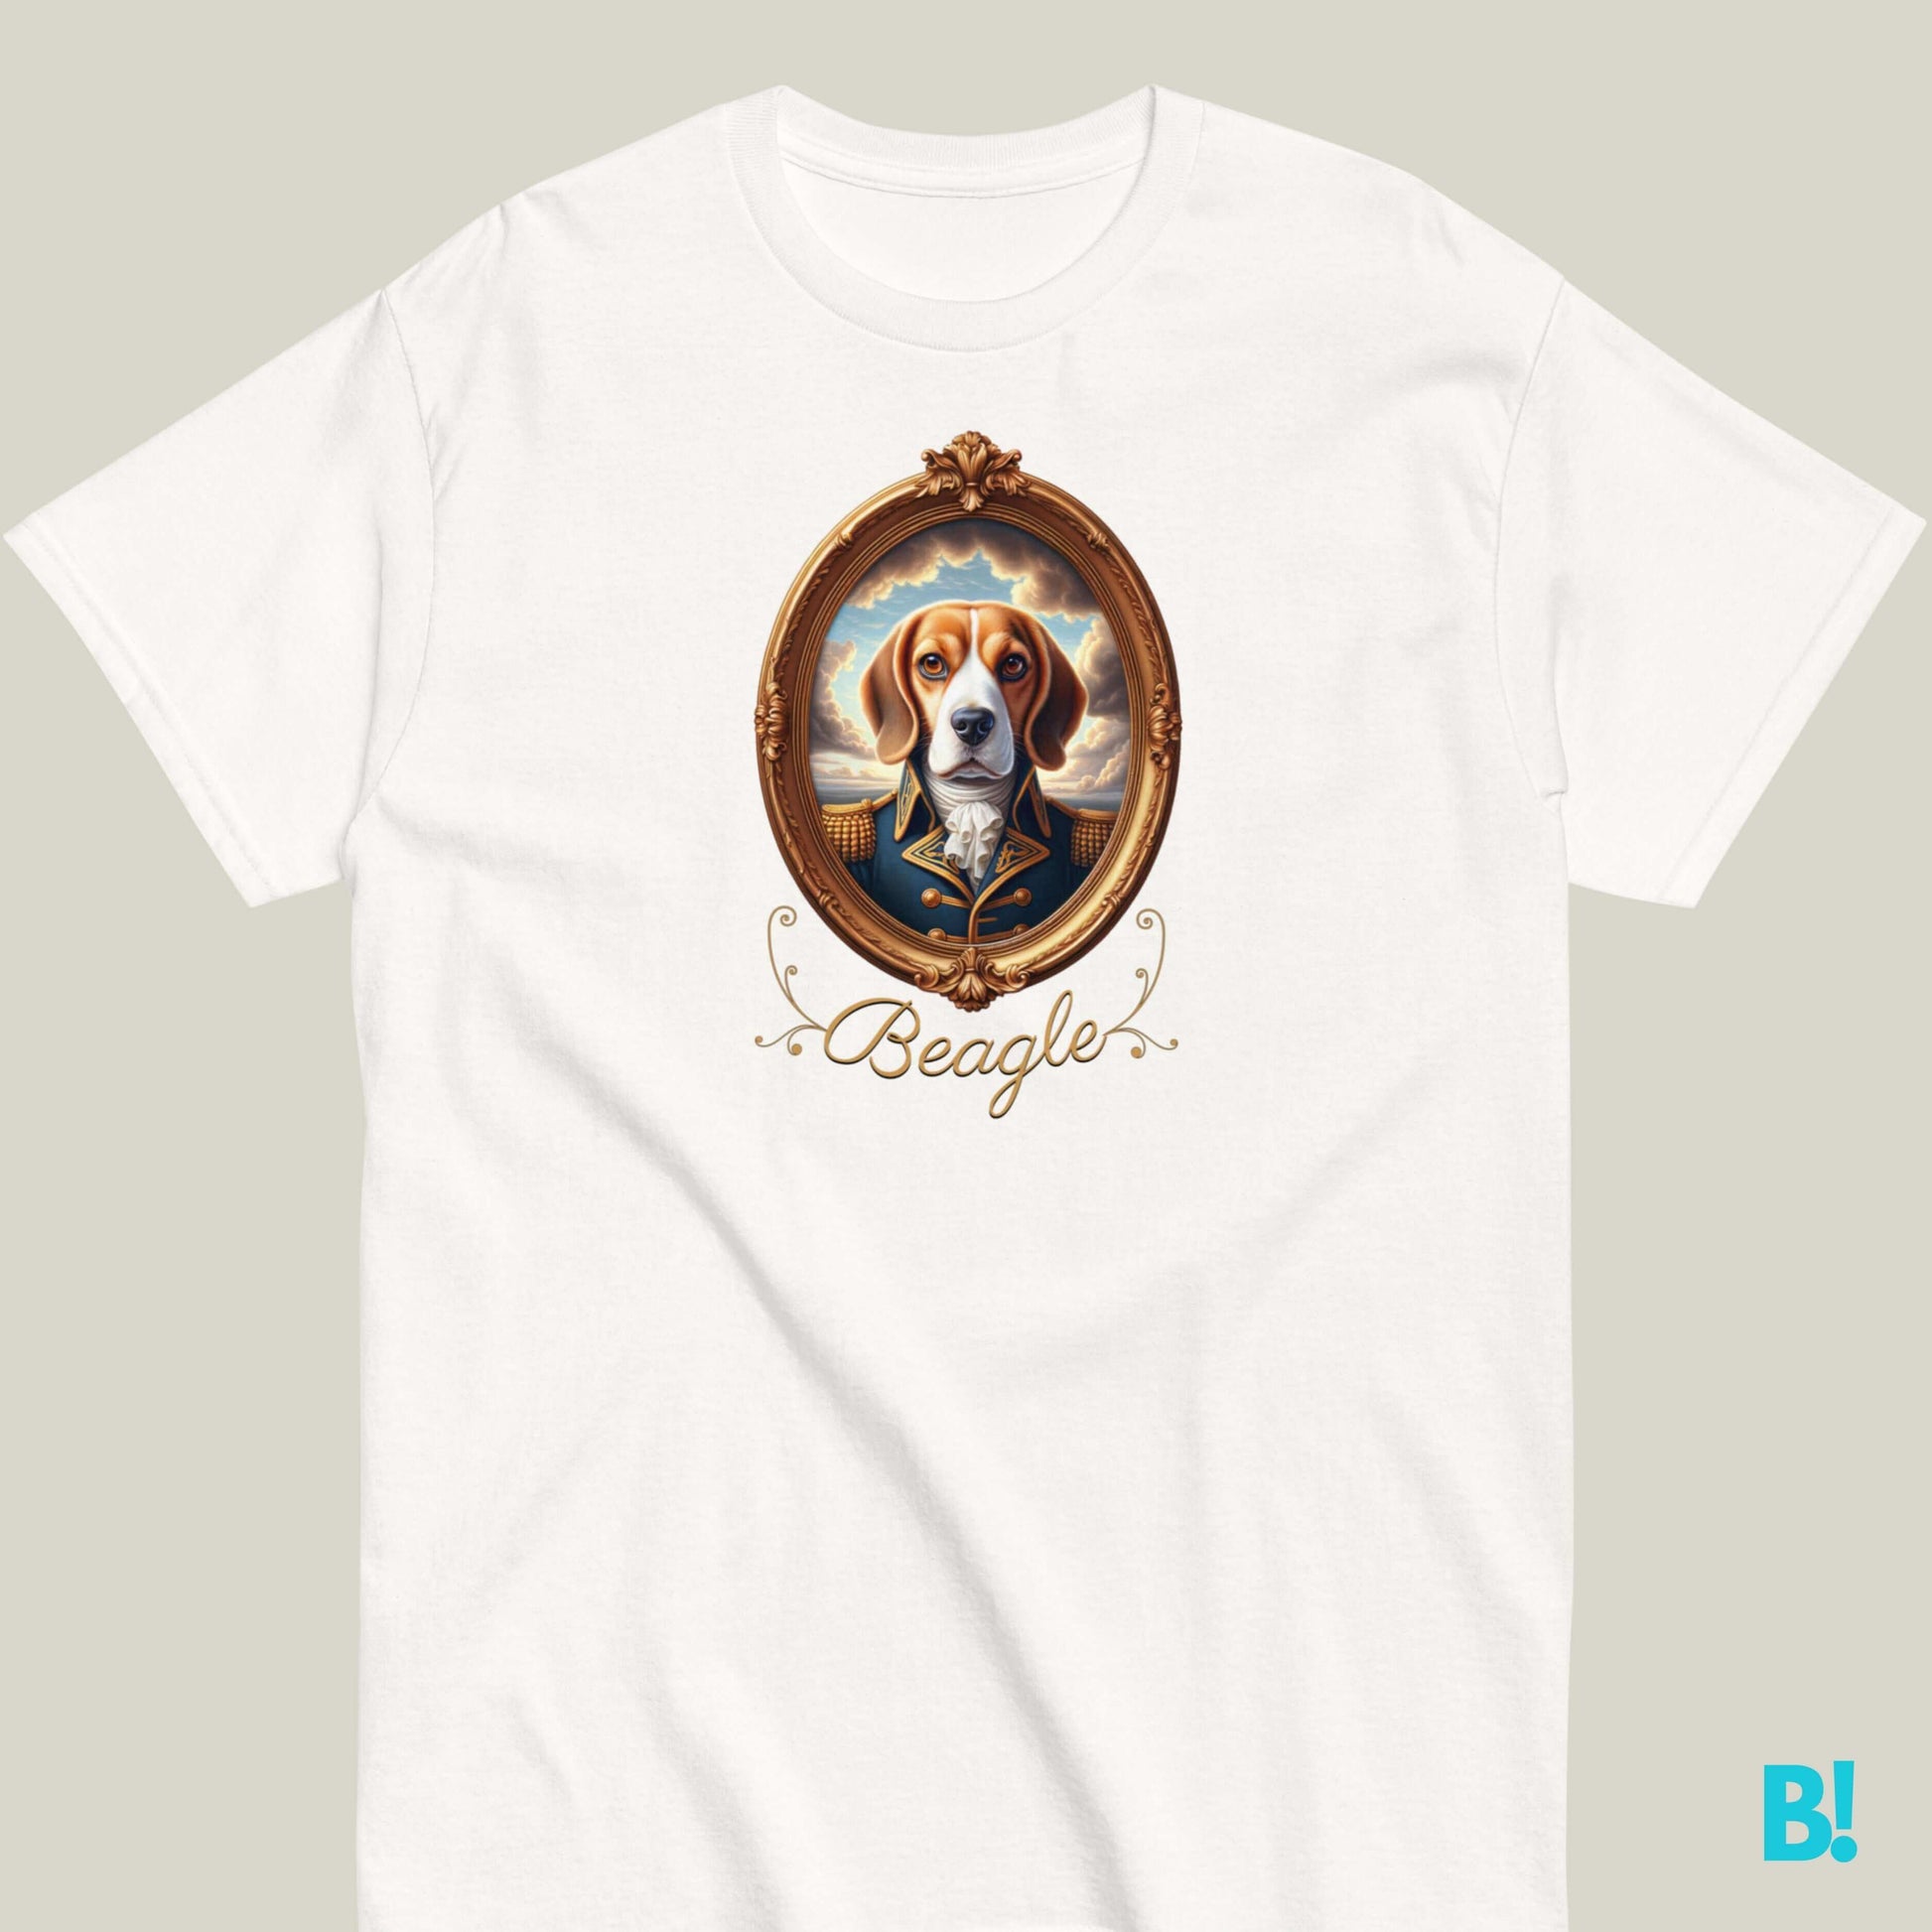 BEAGLE Unisex Cotton T-Shirt: Embrace Adventure Join the adventure with BEAGLE, a 100% cotton unisex T-shirt that celebrates curiosity and companionship. Available in 7 colours, sizes S-XXXL. €29.50 B!NKY Comfywear